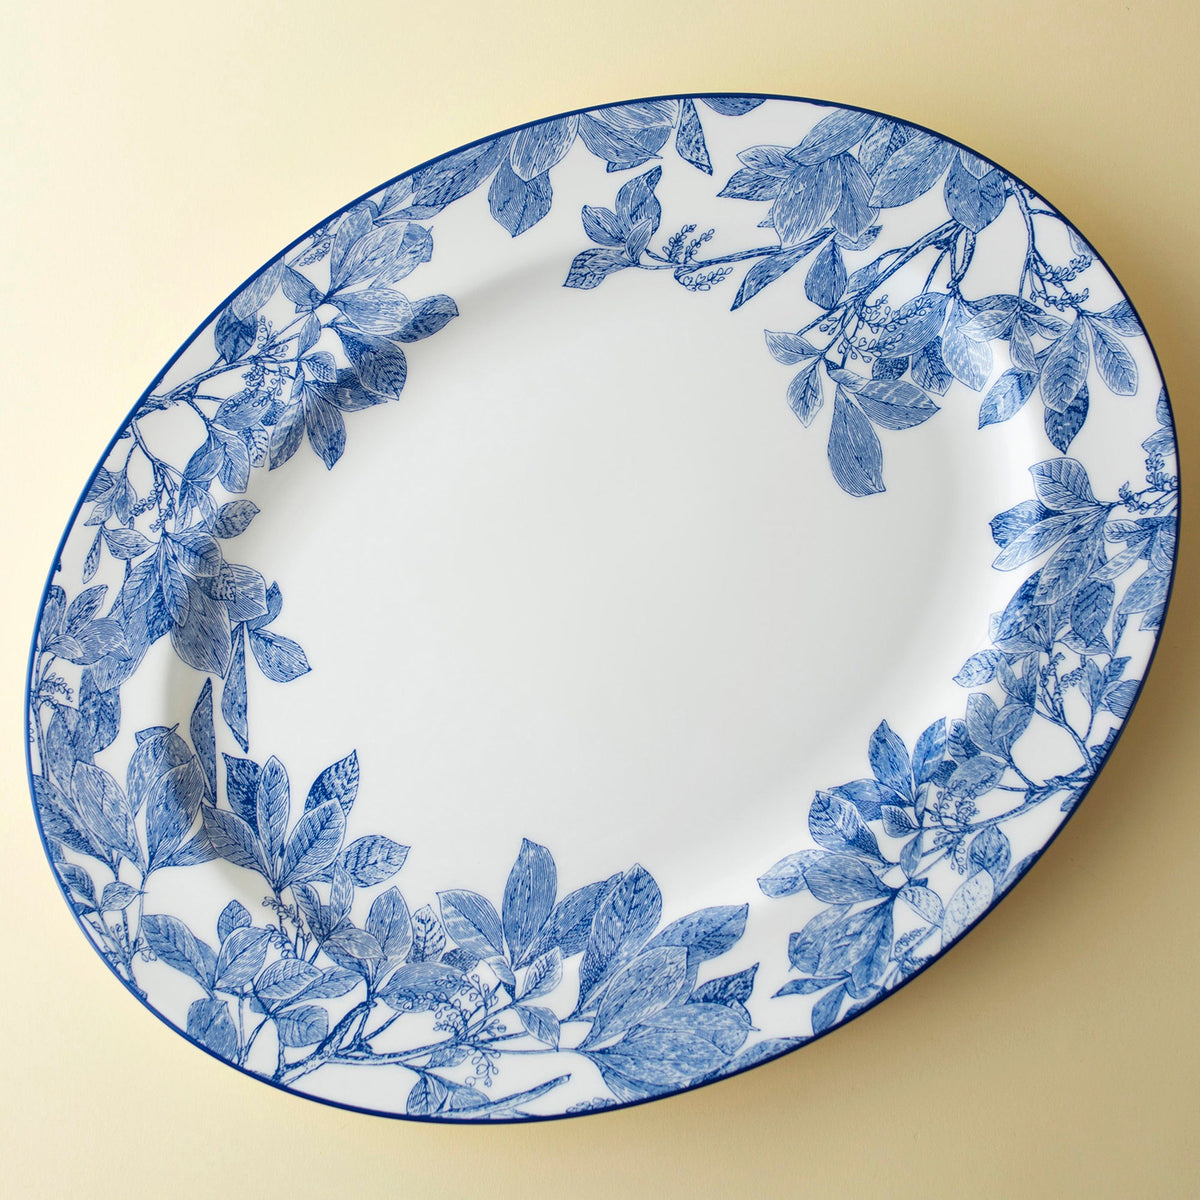 A vintage Blue Arbor Large Oval Rimmed Platter with leaves on it by Caskata Artisanal Home.